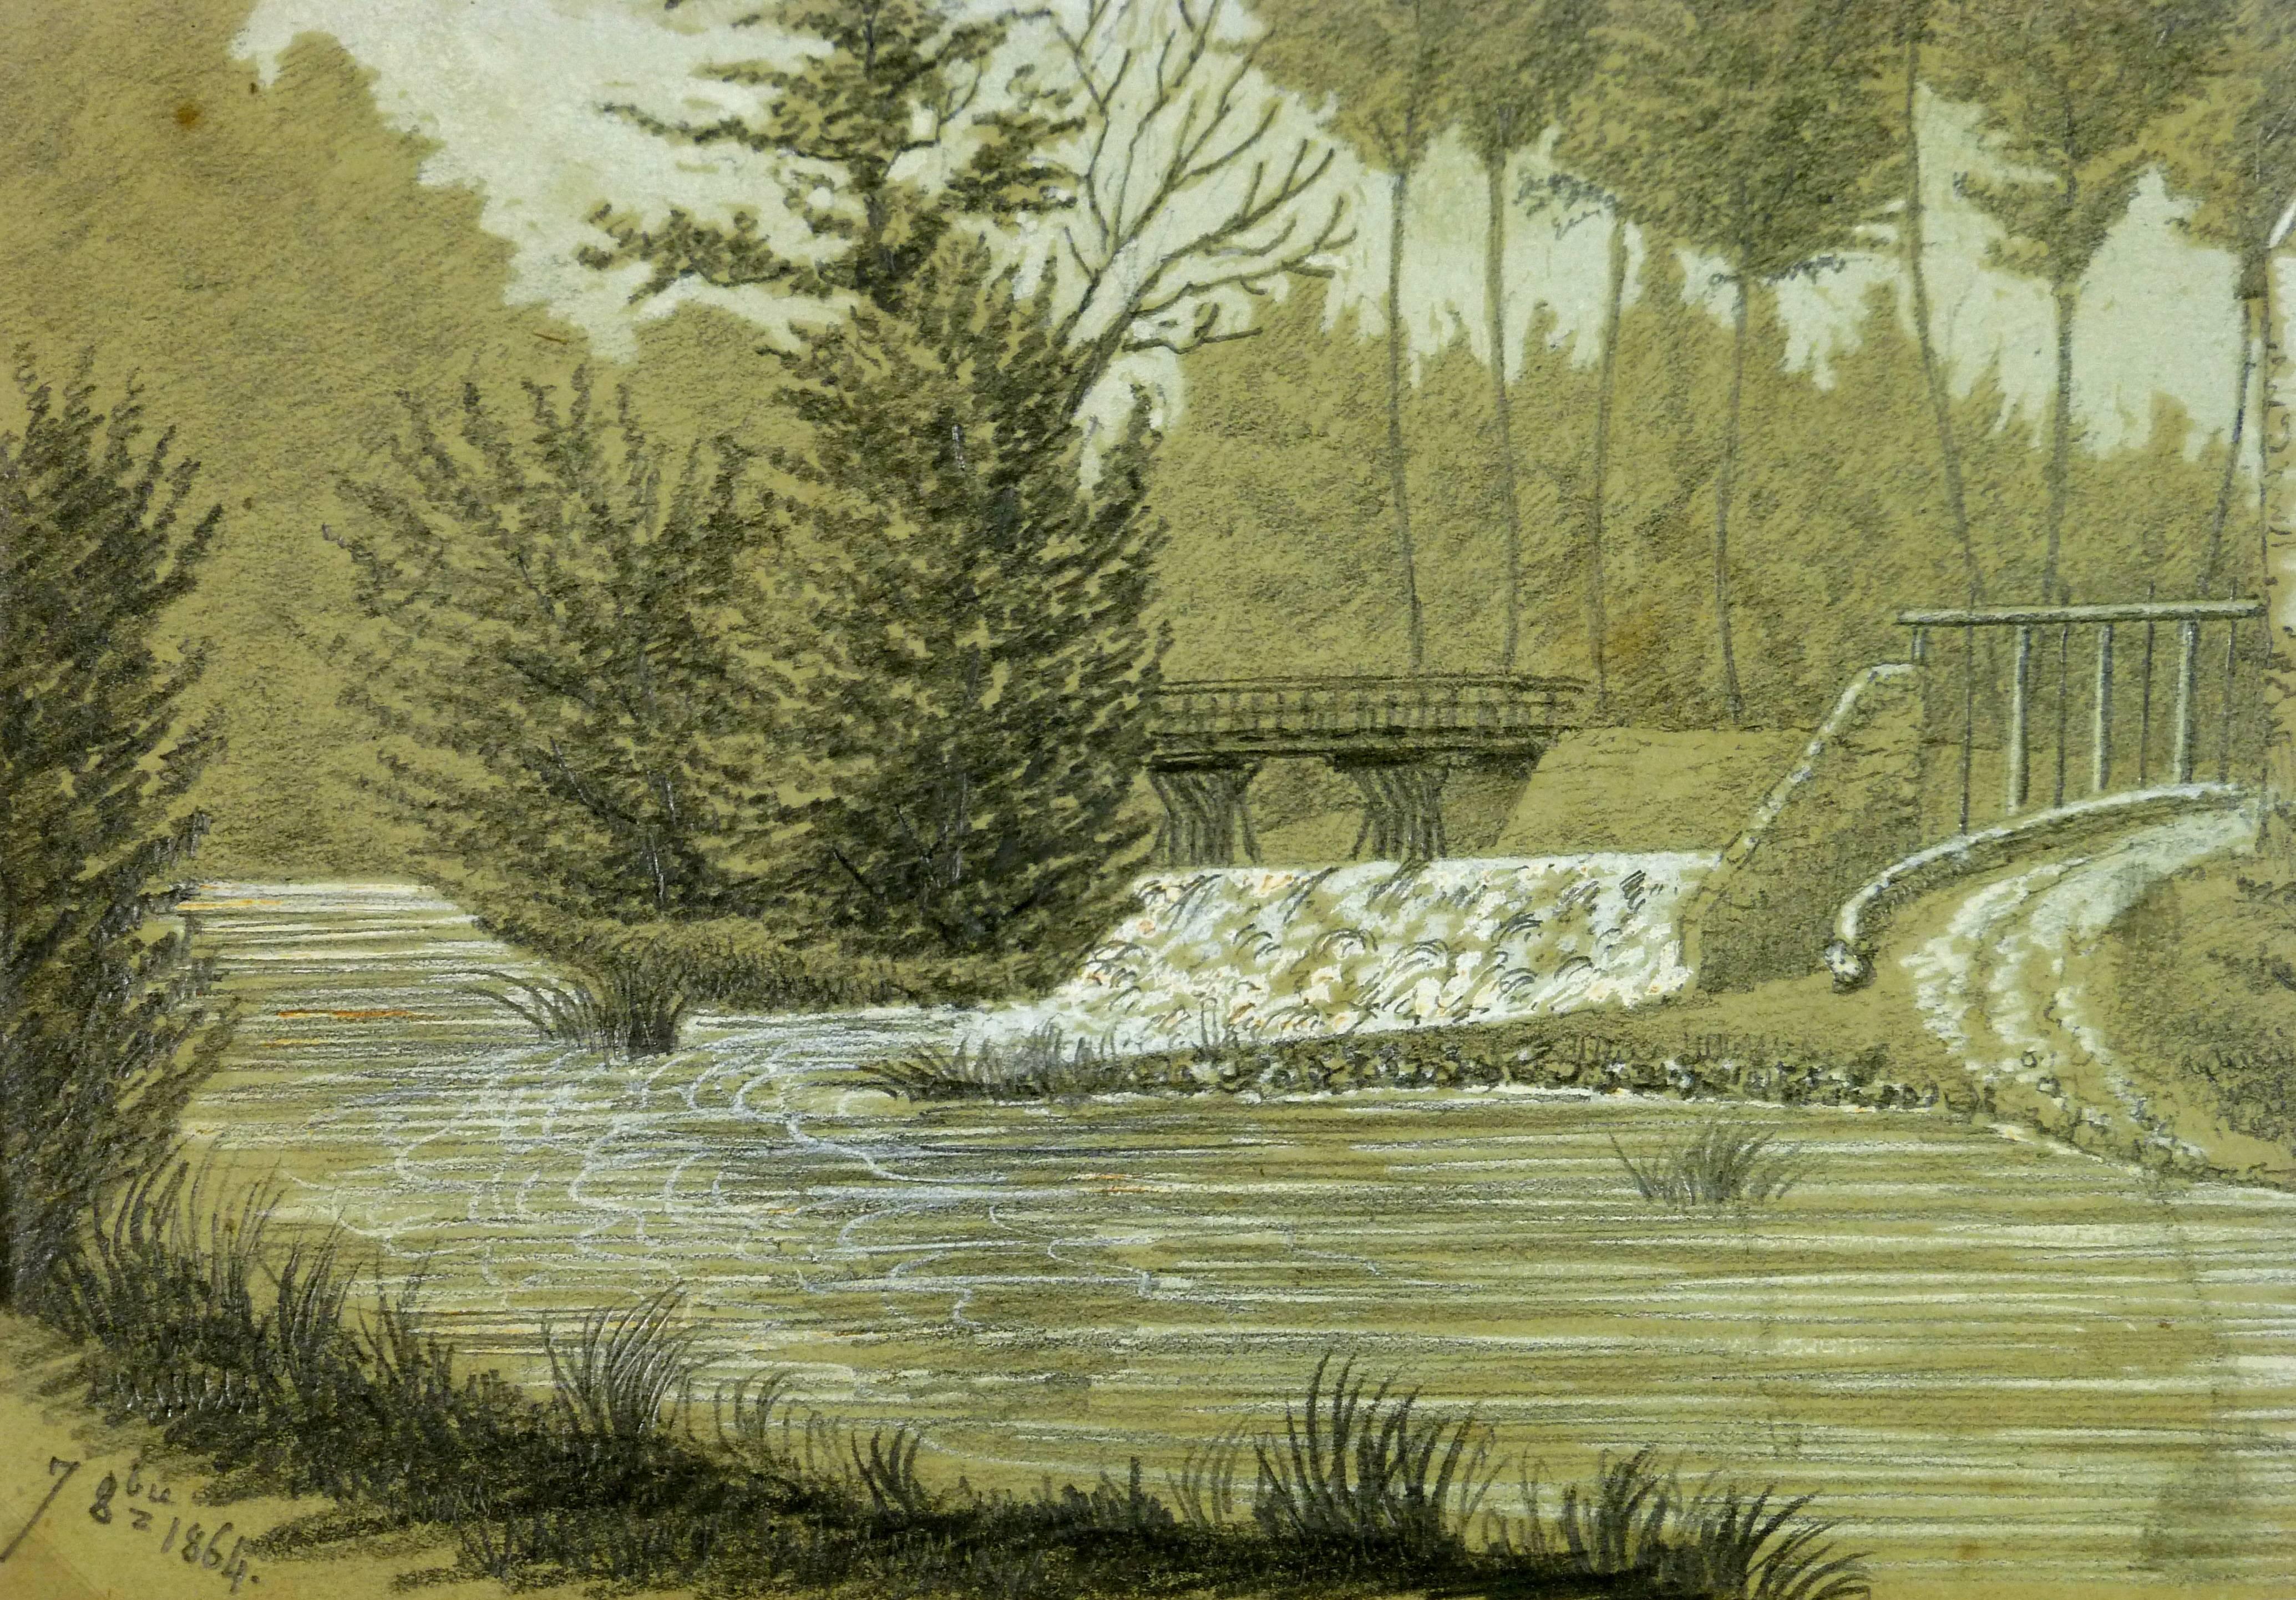 Drawing of French house on River - Brown Landscape Art by Unknown